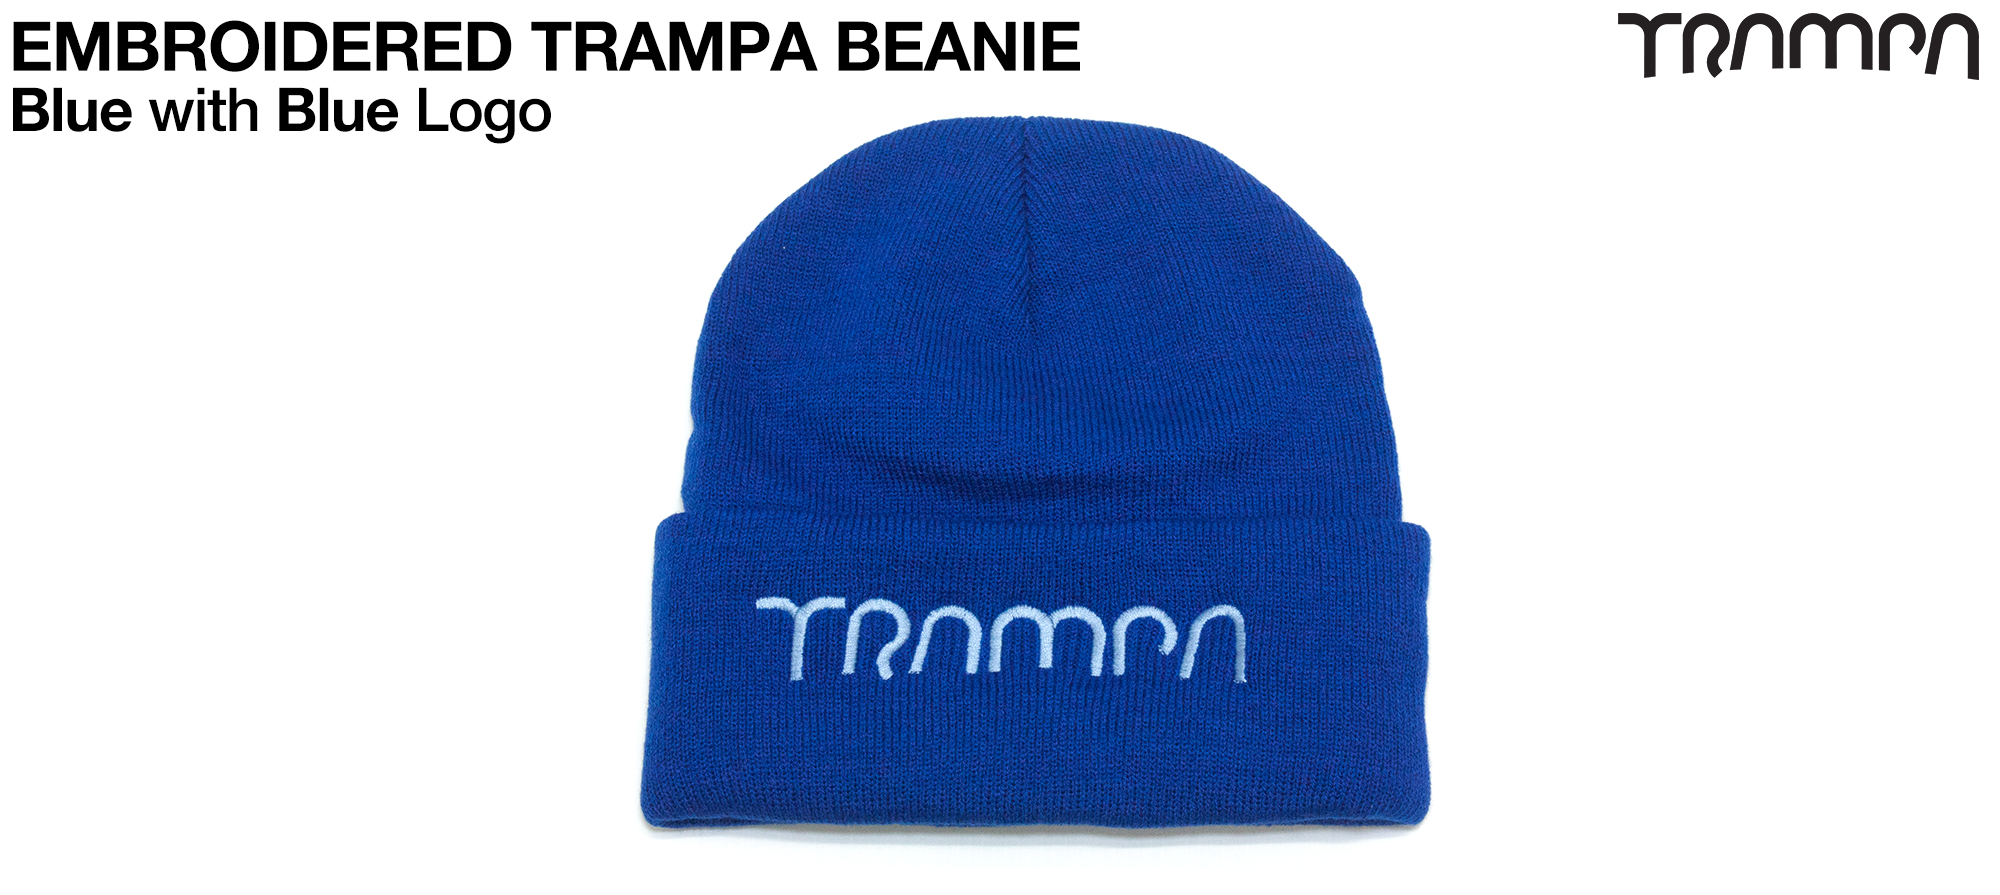 BLUE Wooli Hat with BLUE TRAMPA Embroidery - Double thick turn over for extra warmth 